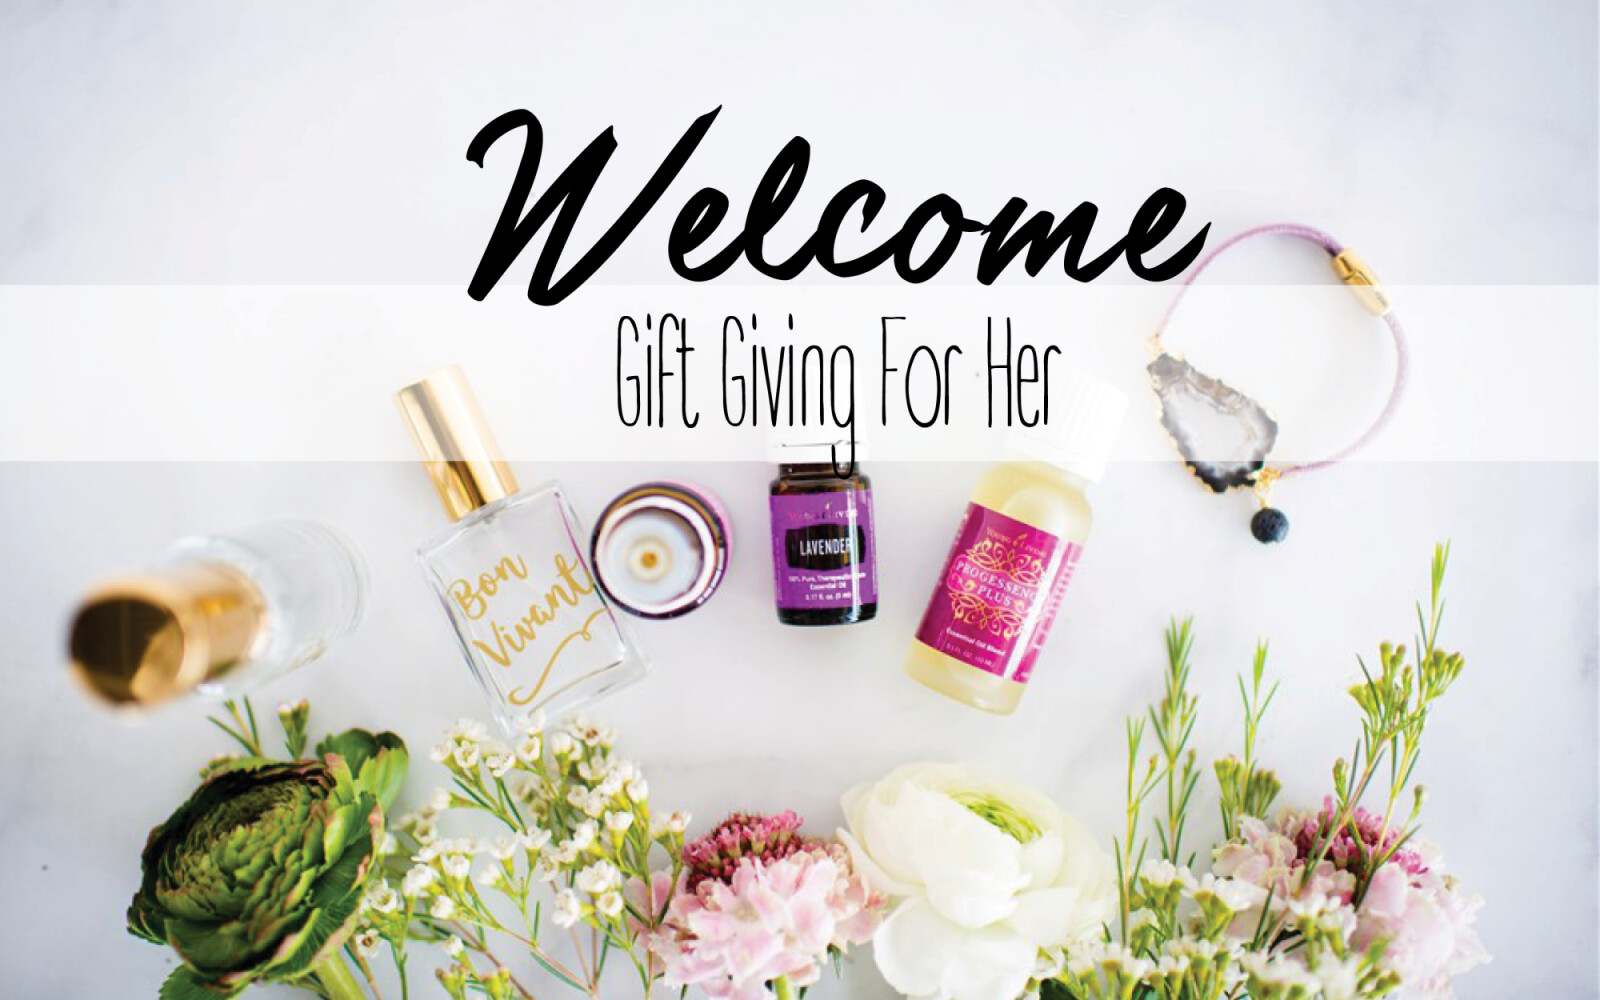 Great Gifts for Her!